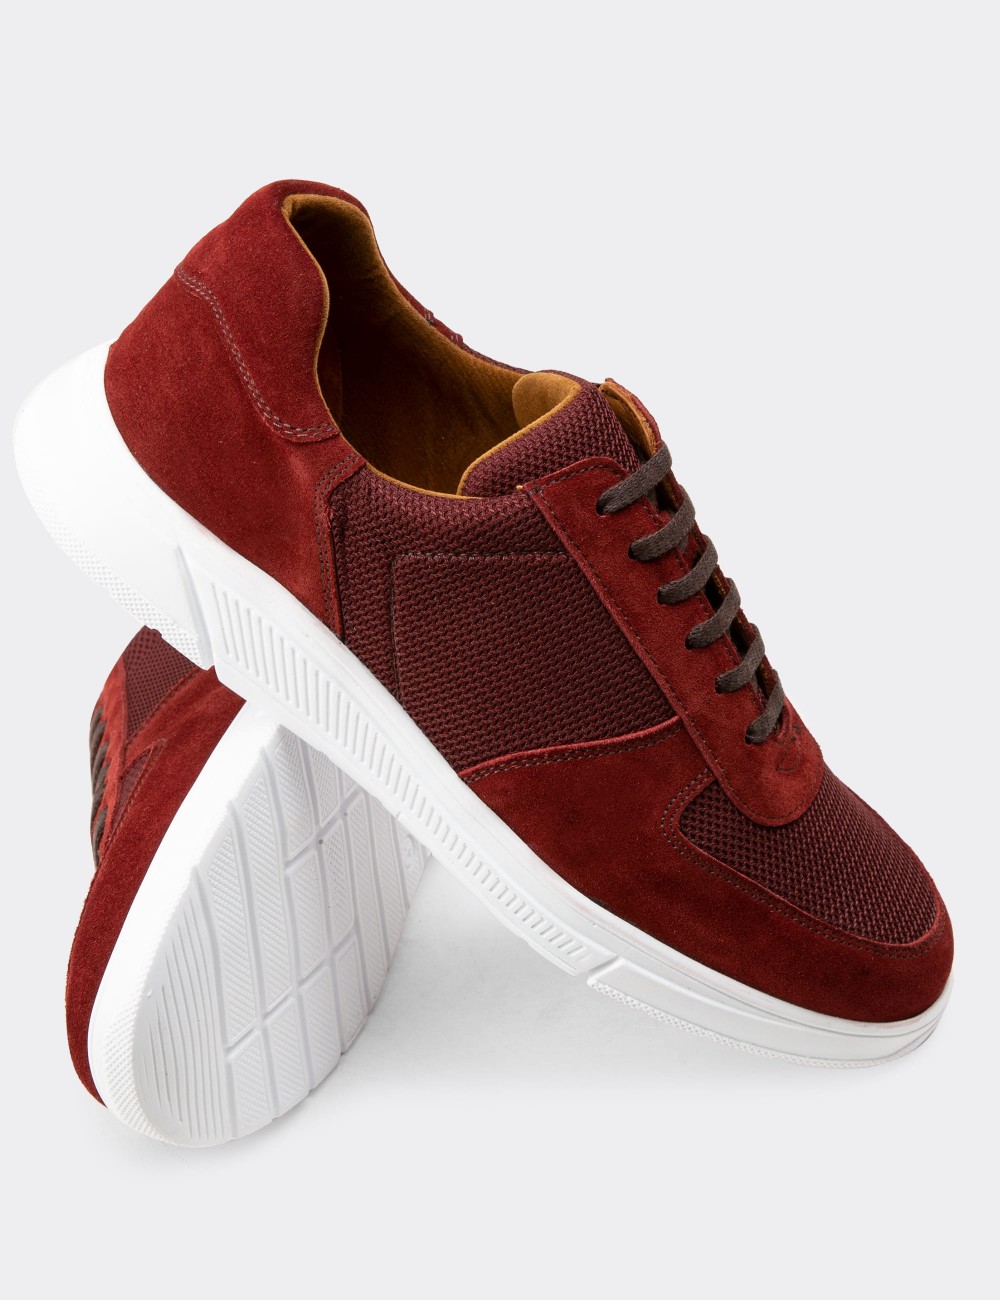 Burgundy Suede Leather Sneakers - 01860MBRDC01